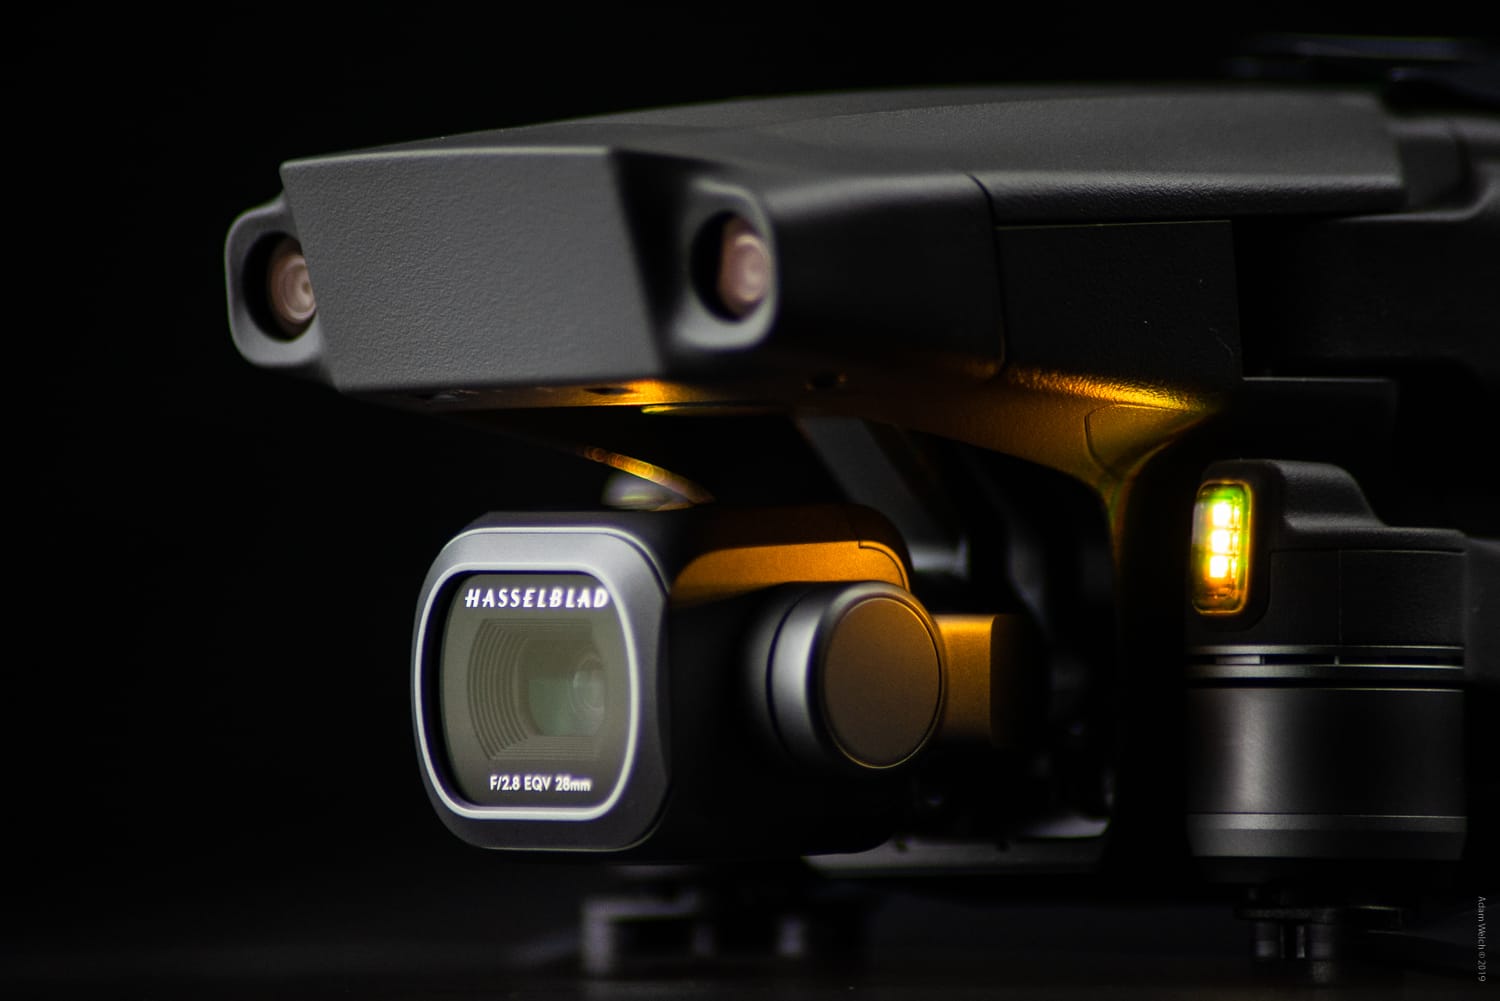 Hands-On Review of the DJI Mavic 2 Pro Photography Drone